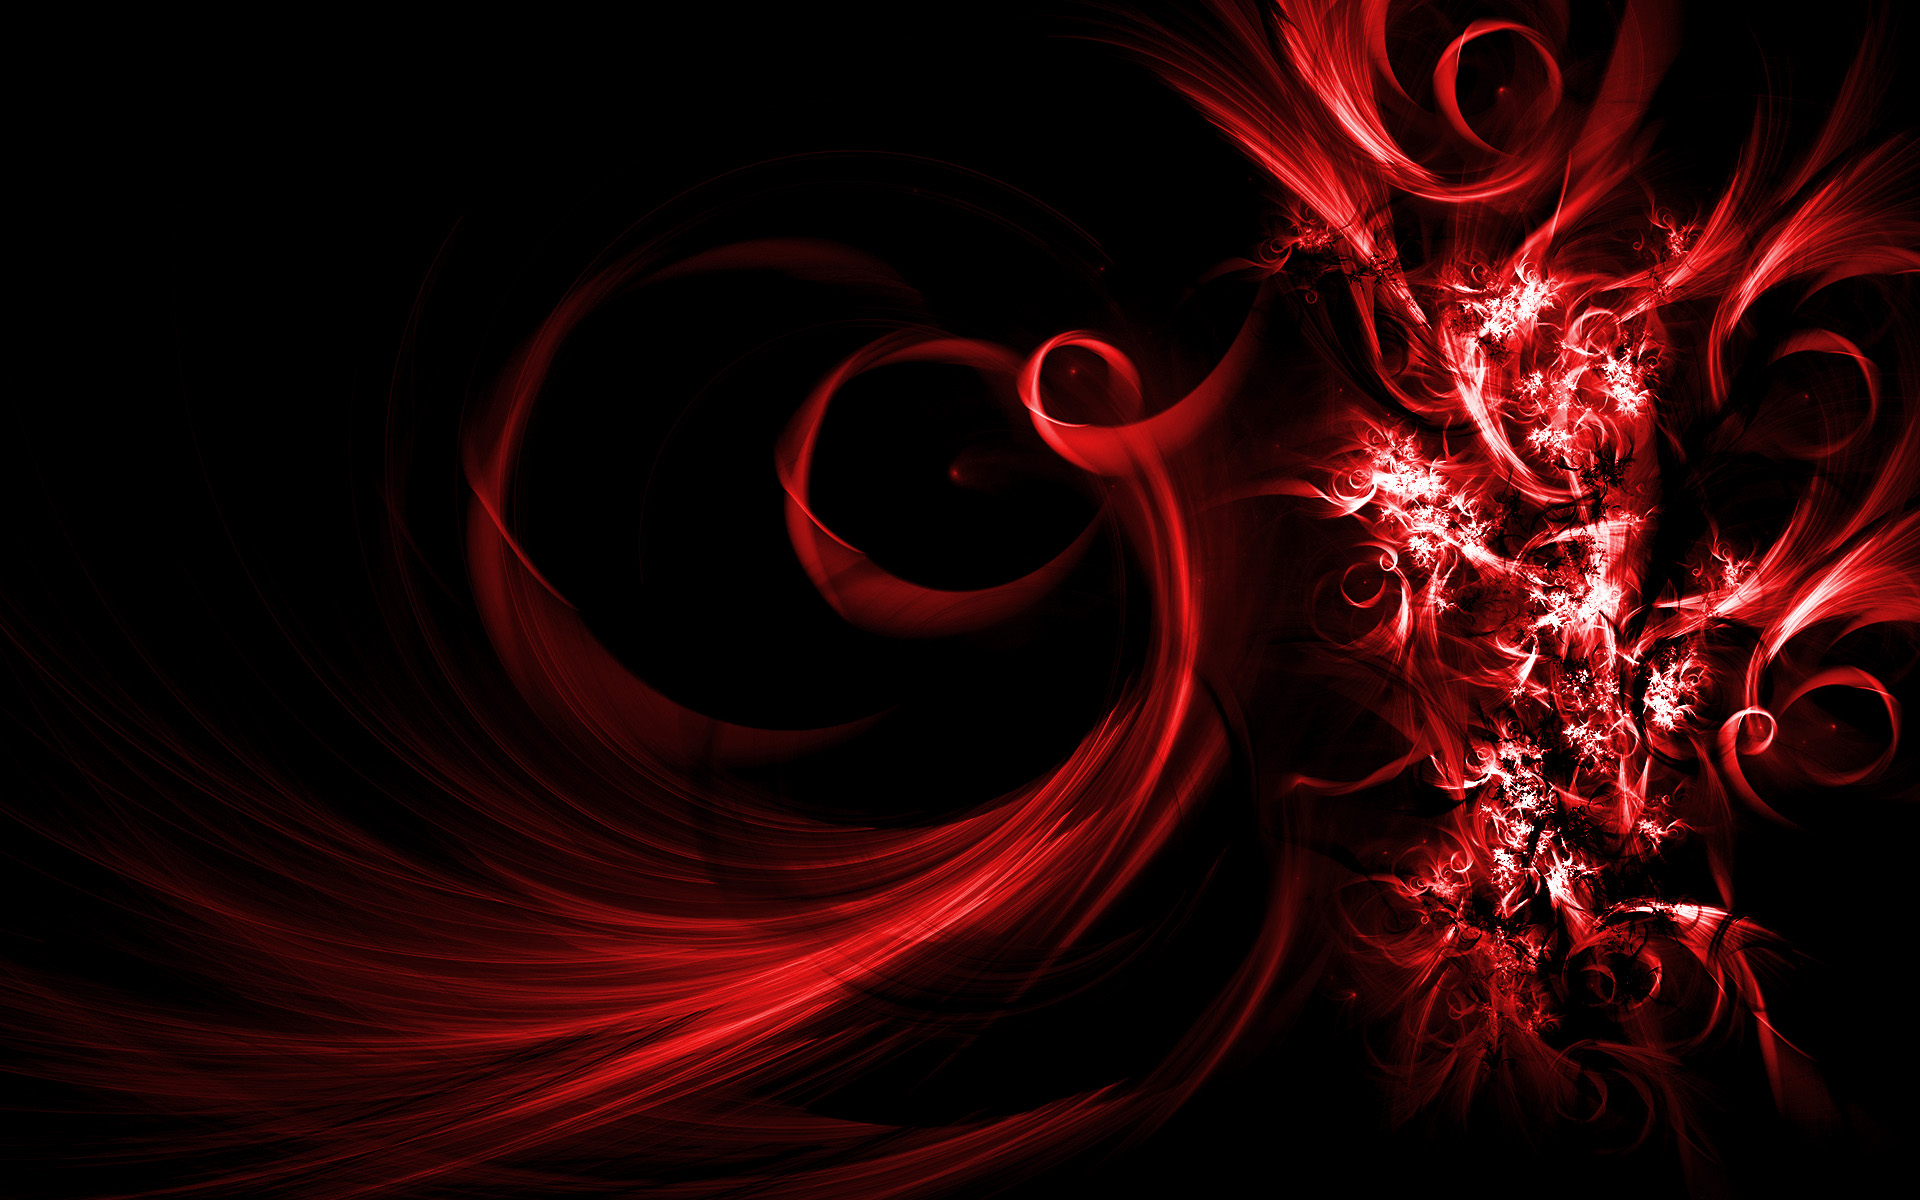 Red Abstract wallpaper 198876 1920x1200